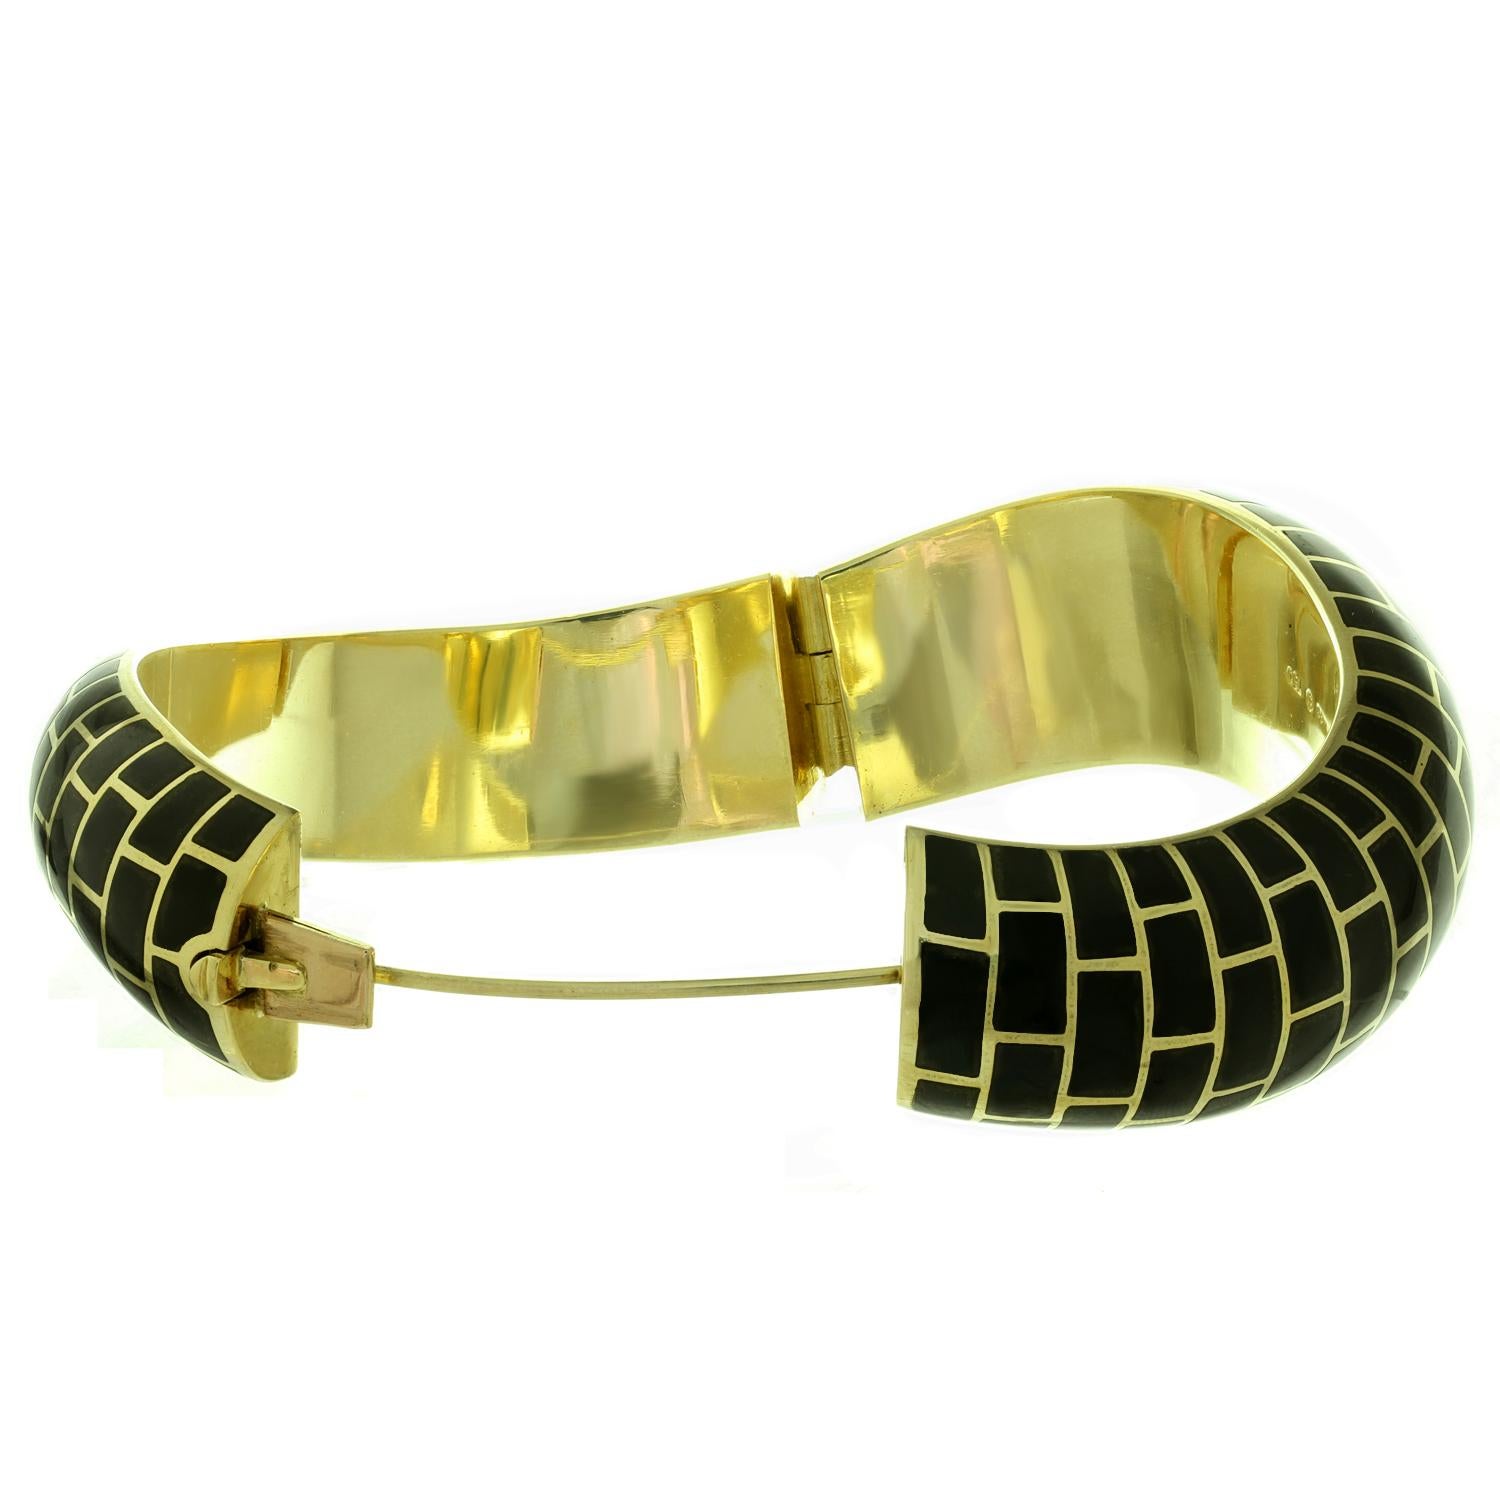 This gorgeous Angela Cummings for Tiffany & Co wave-shaped bangle bracelet feature a chic geometric pattern crafted in 18k yellow gold and inlaid with black jade. Made in United States circa 1980s. Measurements: 1.10